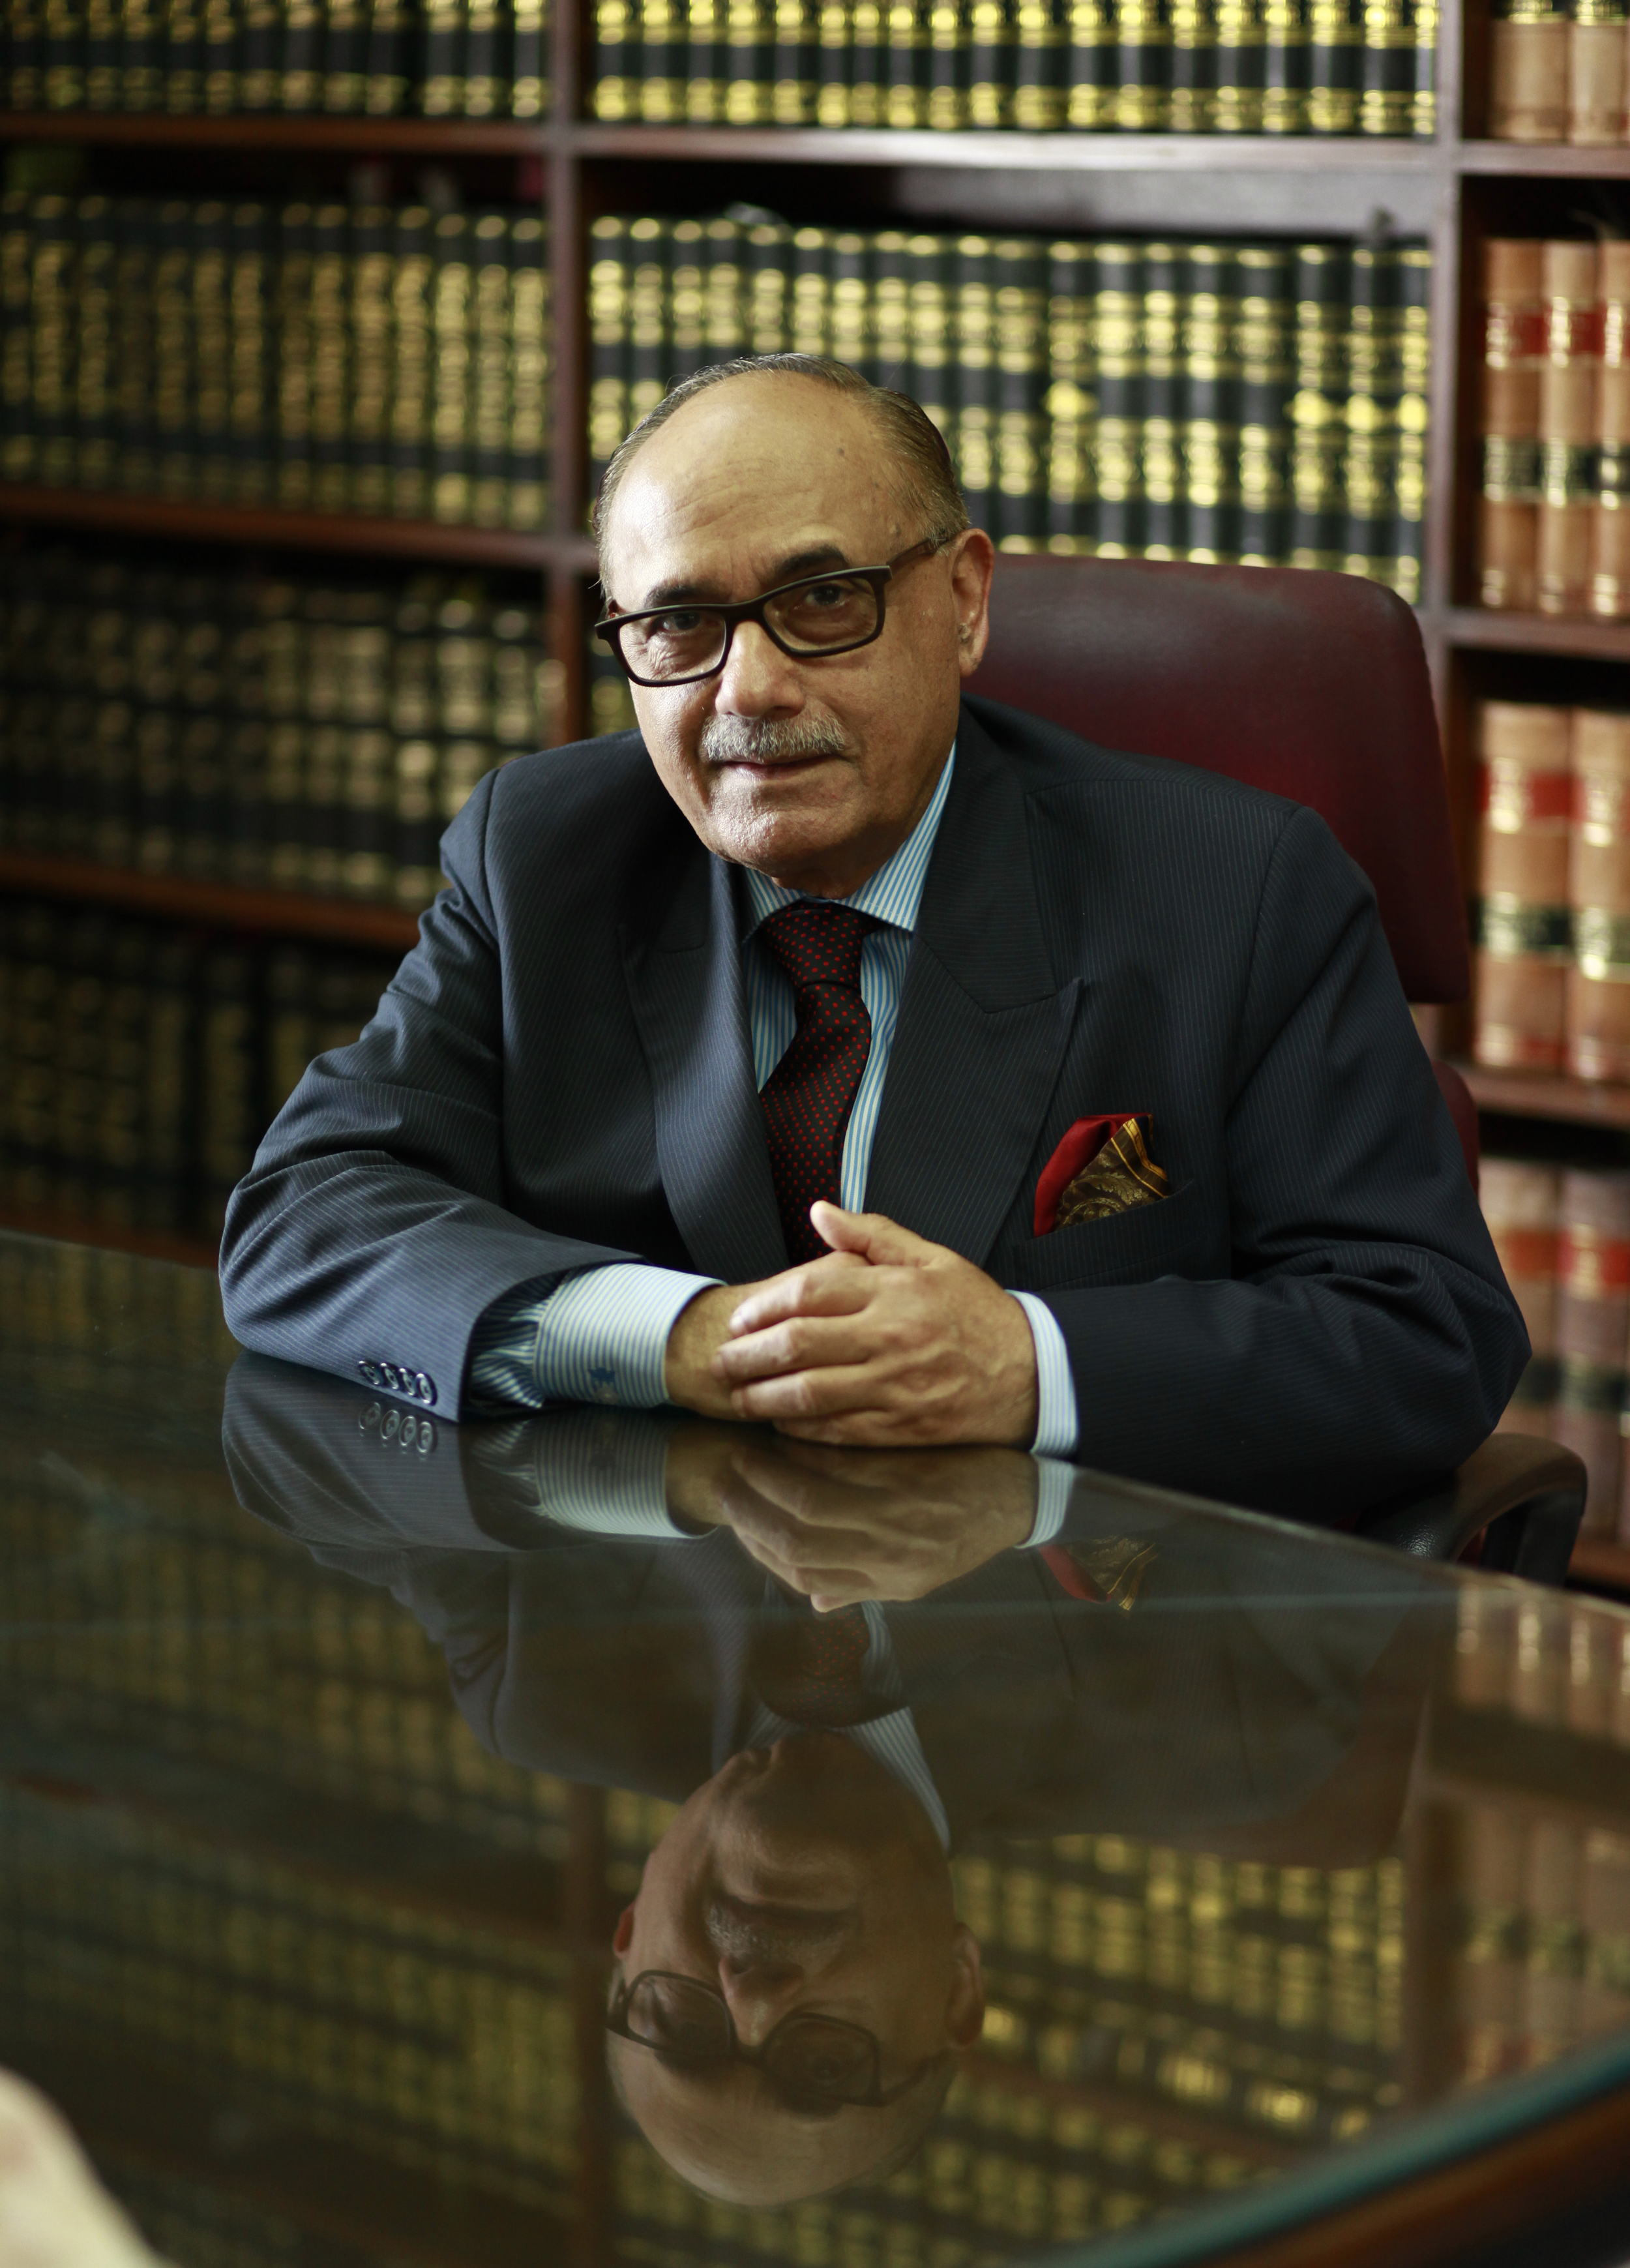 Dr. Lalit Bhasin, <span>President <br> The Bar Association of India & Society of Indian Law Firms (SILF)</span>